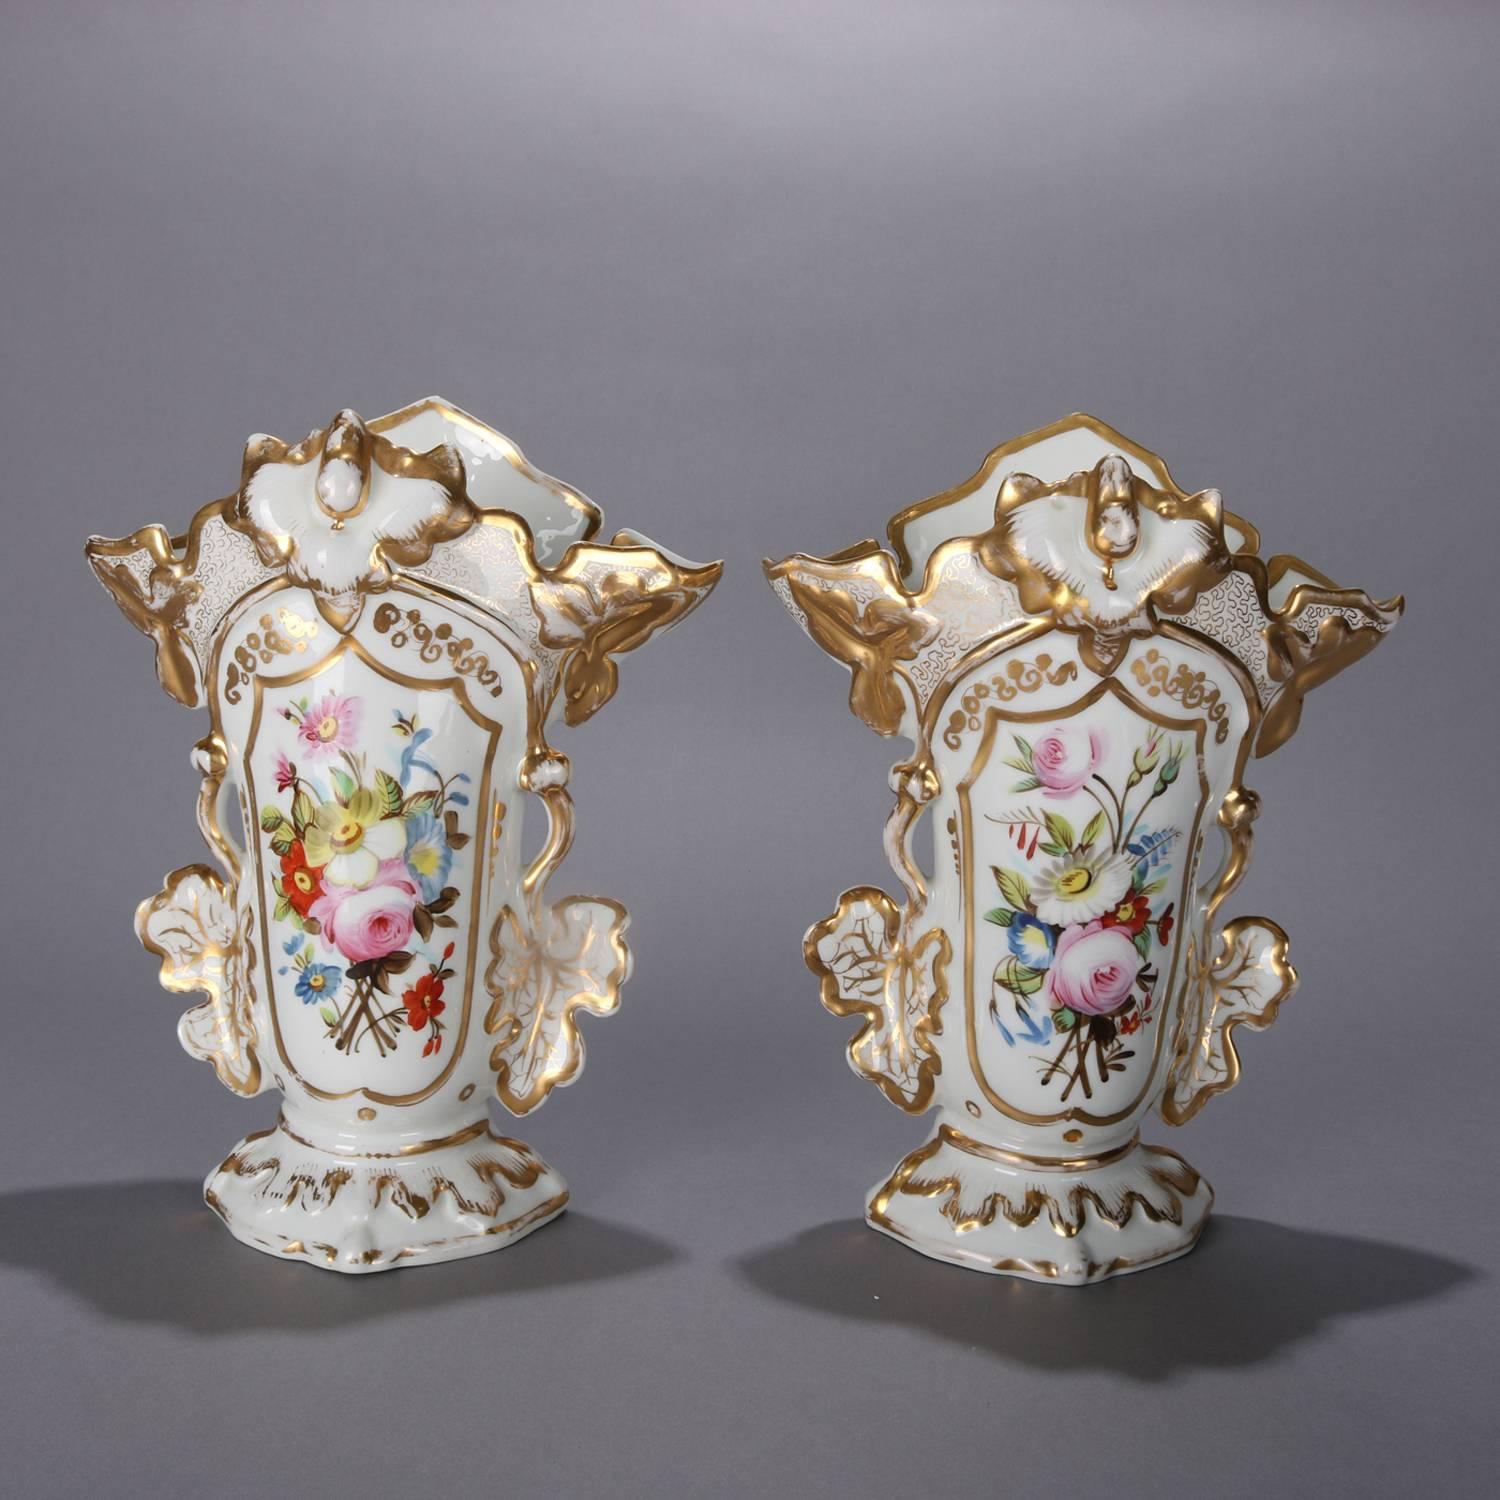 Victorian Pair of Antique Hand-Painted and Gilt Floral Old Paris Porcelain Spill Vases